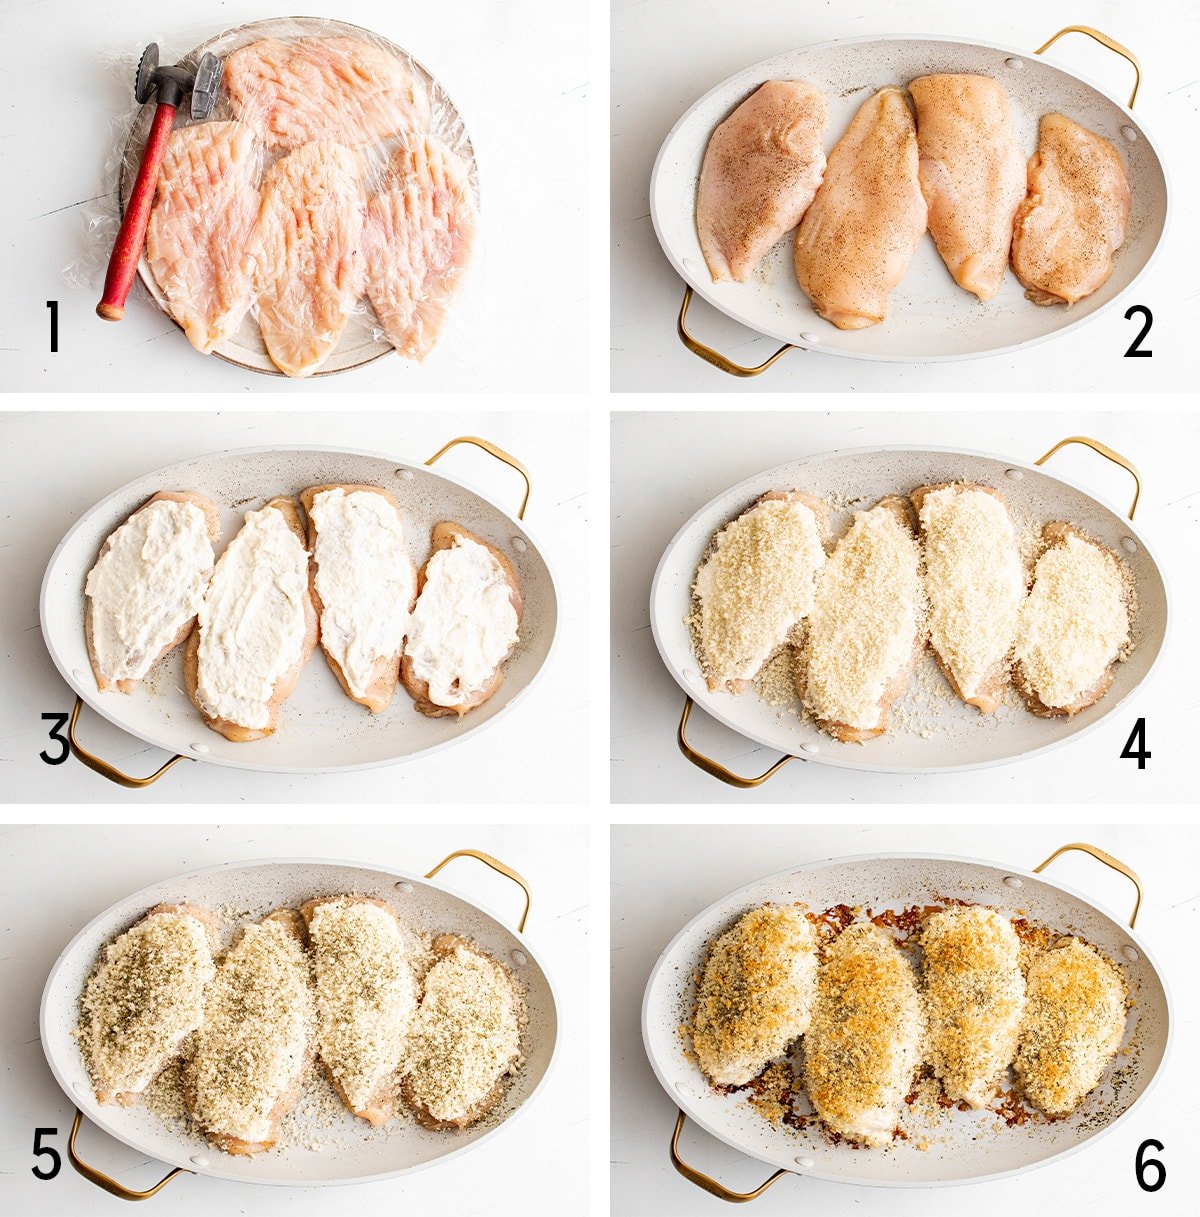 Collage of images showing the steps for making crispy payo chicken.